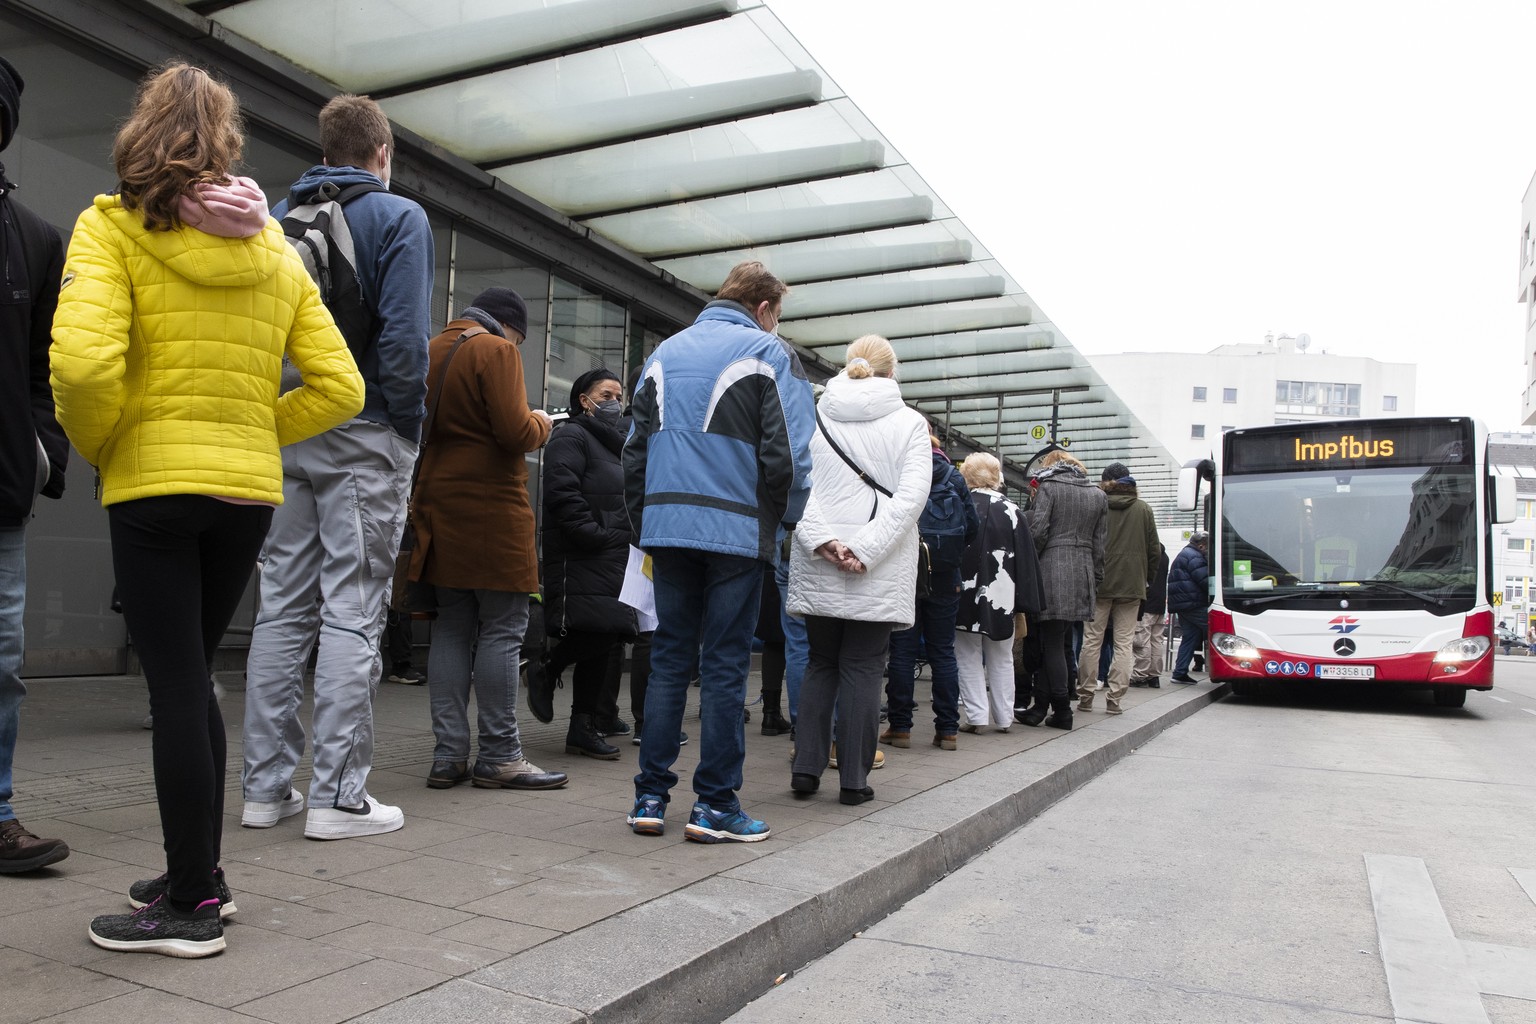 People wait in a long queue to get vaccinated against the COVID-19 virus in a public bus, that drives around the city and offers the COVID-19 vaccination without appointments and for free in Vienna, A ...